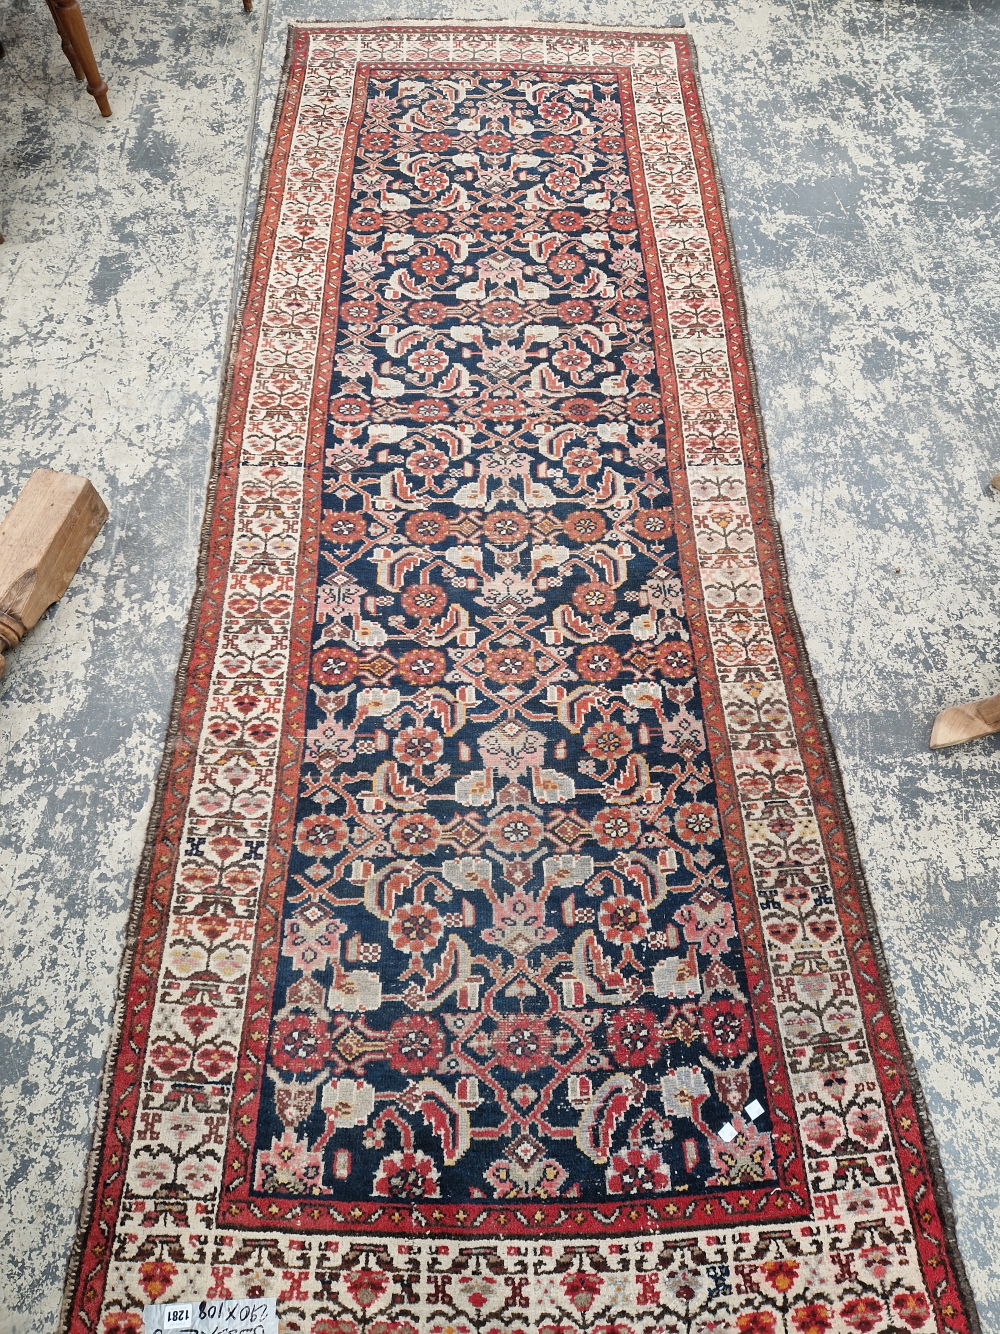 A PERSIAN HAMADAN RUNNER 290 x 108 cm, TOGETHER WITH A MACHINE MADE RUG 189 x 90 cm (2) - Image 7 of 7